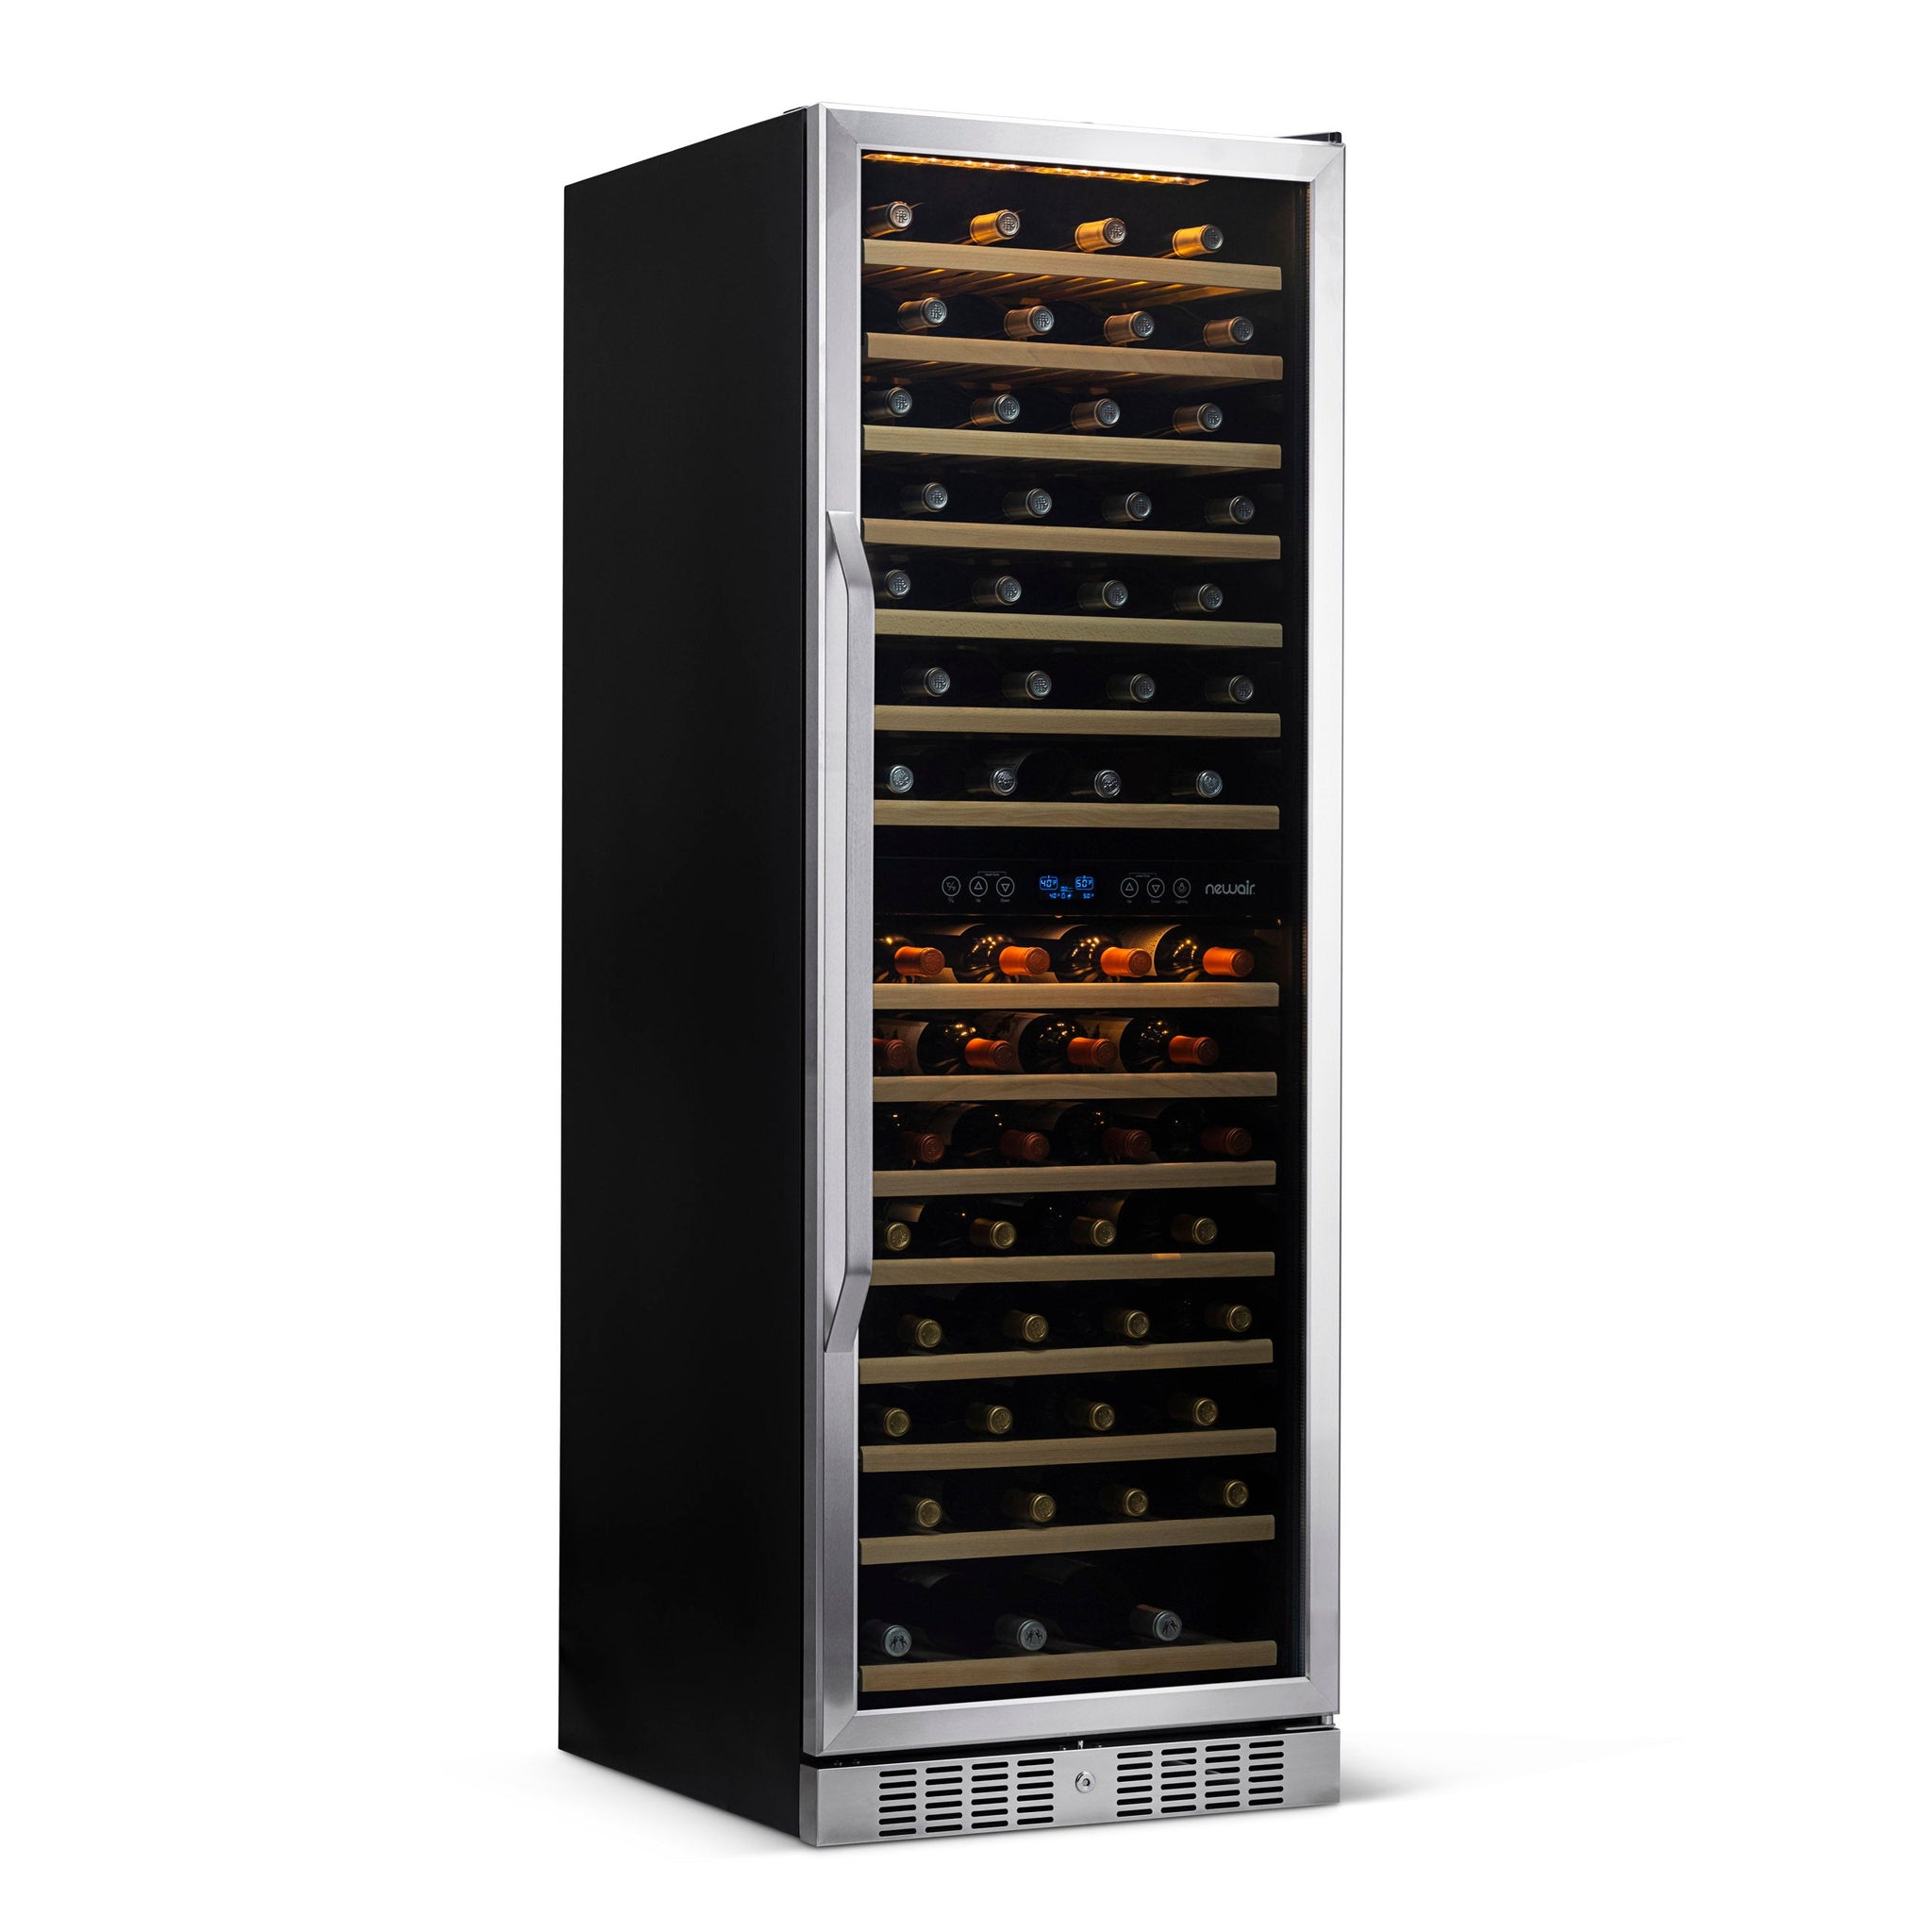 Newair 24” Built-in 160 Bottle Dual Zone Compressor Wine Fridge in Stainless Steel, Quiet Operation with Smooth Rolling Shelves